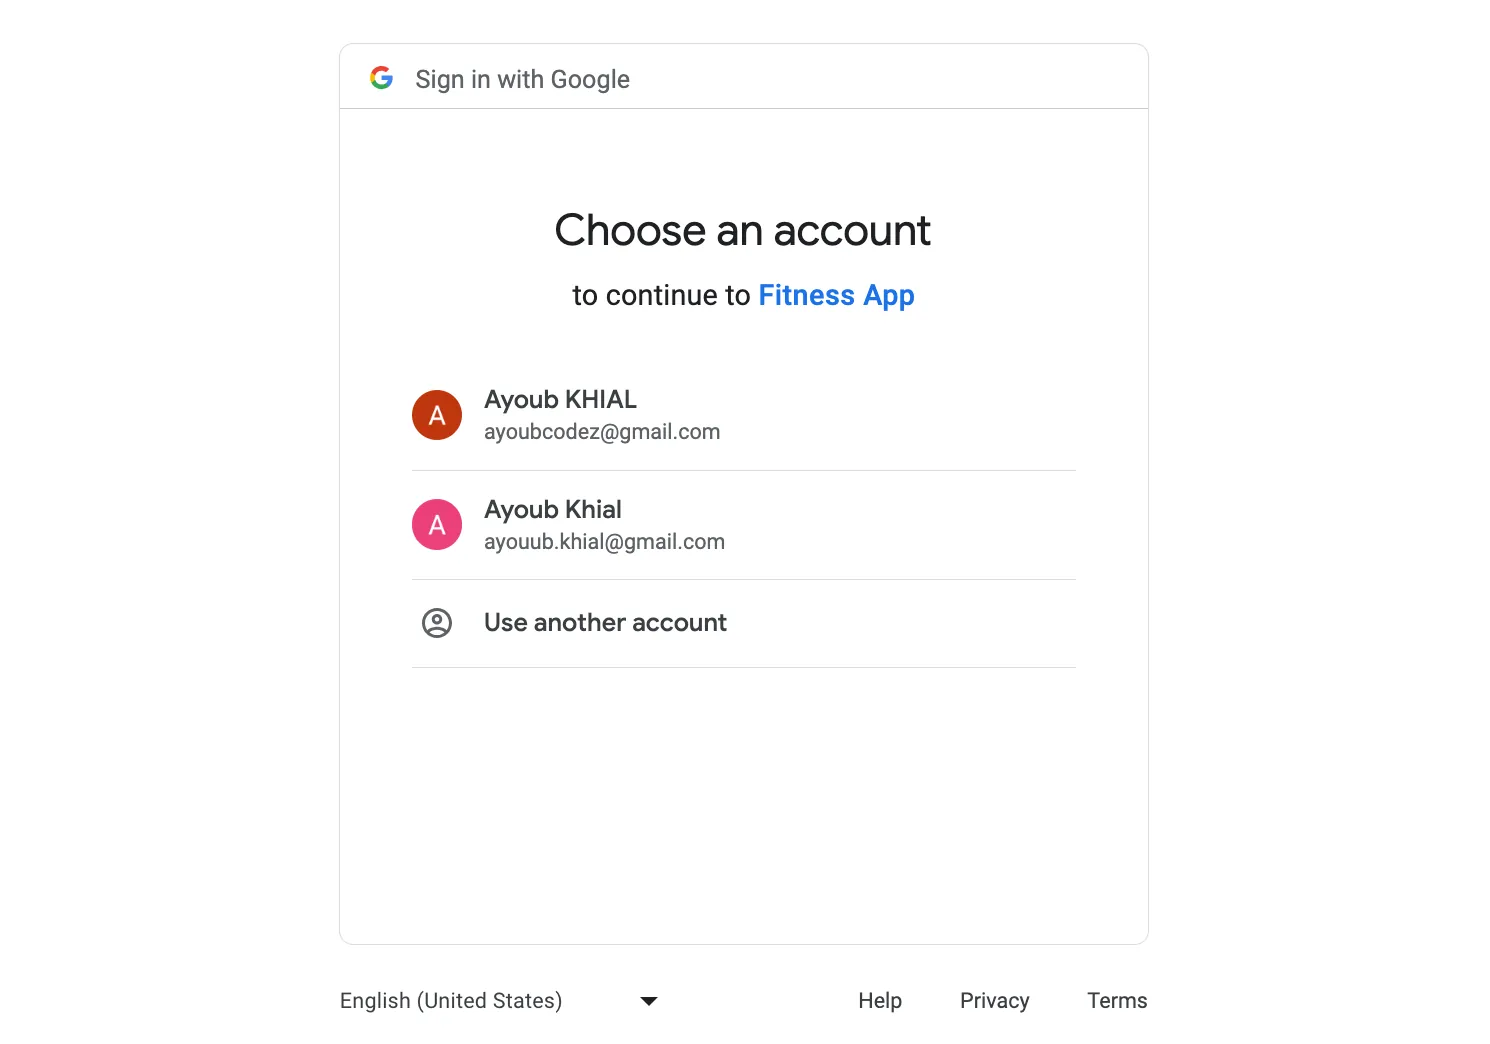 Google API Consent Screen - Sign in